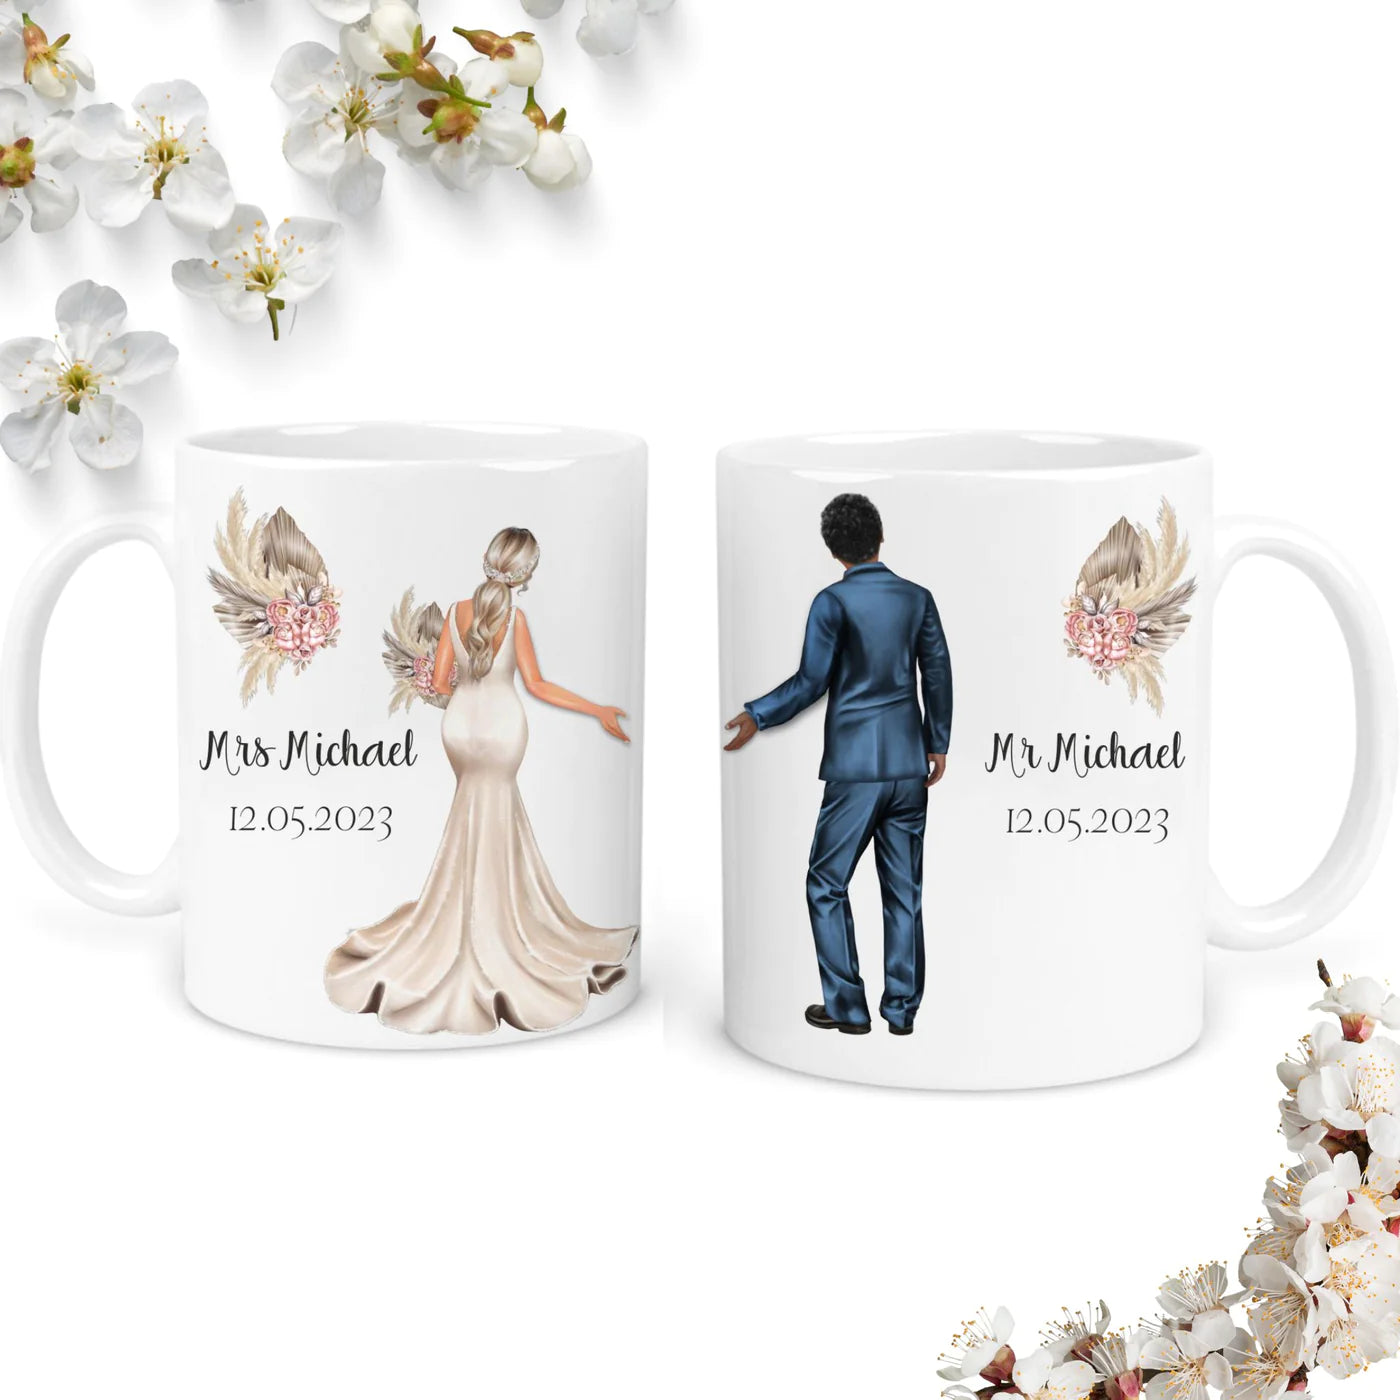 6 Gifts for Husband on Wedding Day Ideas If You Are Looking to Splurge on  Your Husband-To-Be